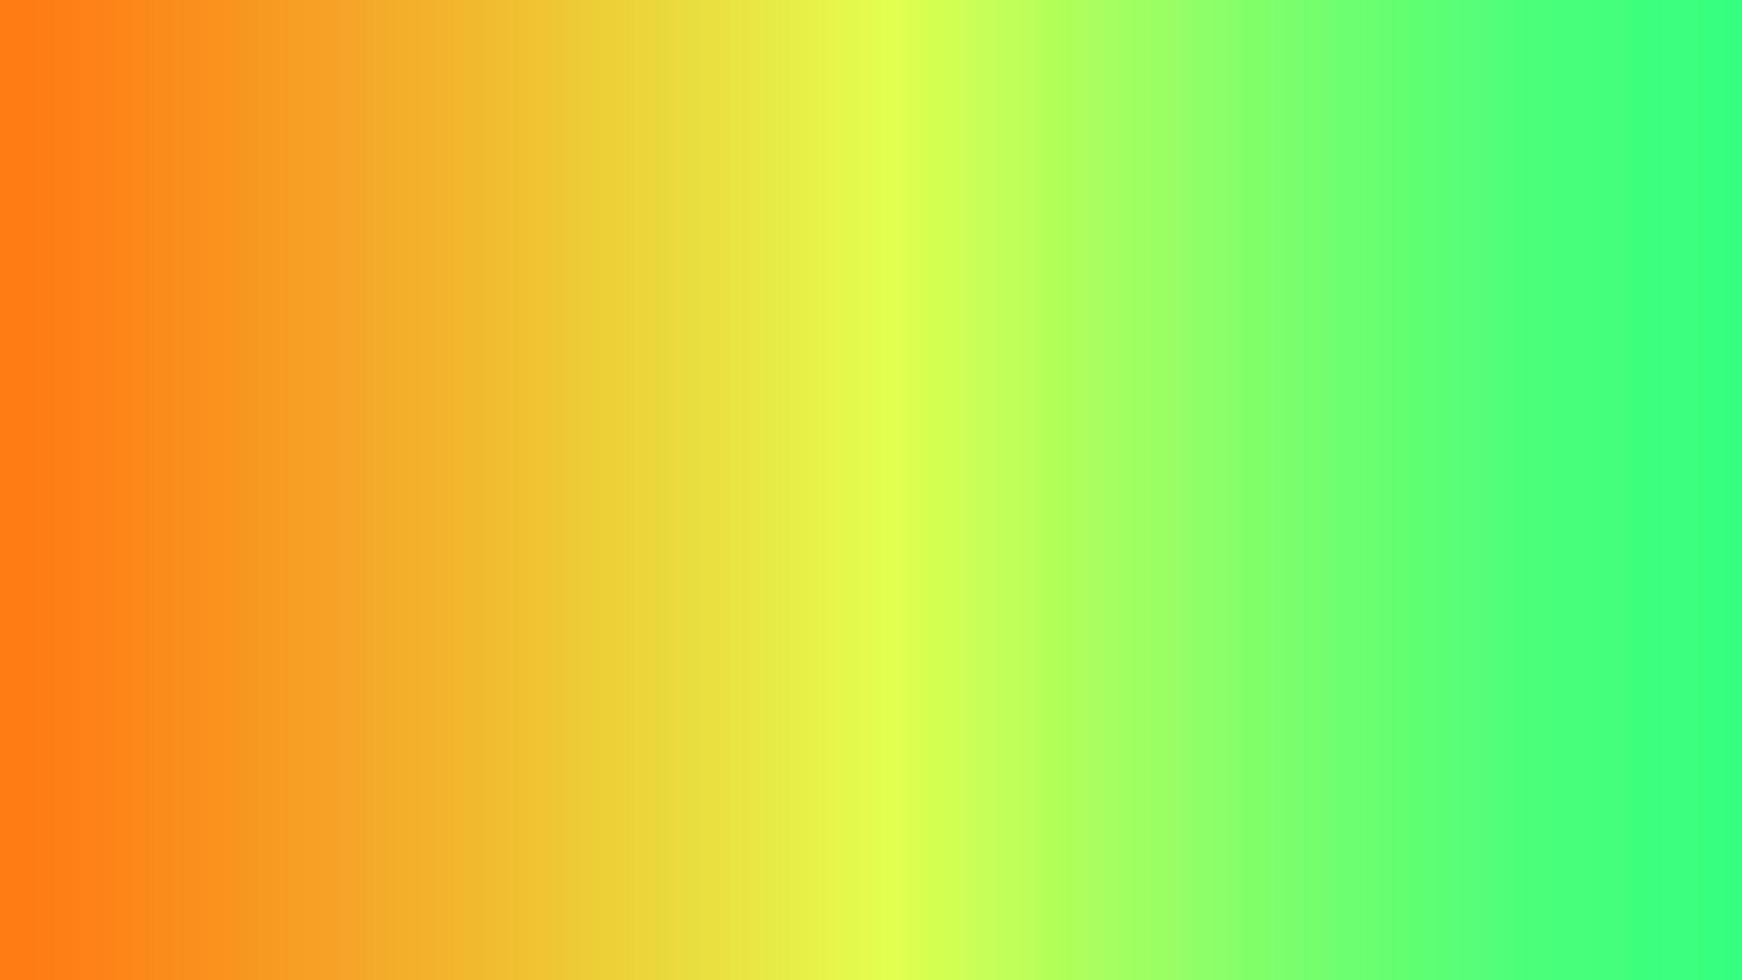 Abstract gradient background orange, yellow, green perfect for design, wallpaper, promotion, presentation, website, banner etc. illustration background vector